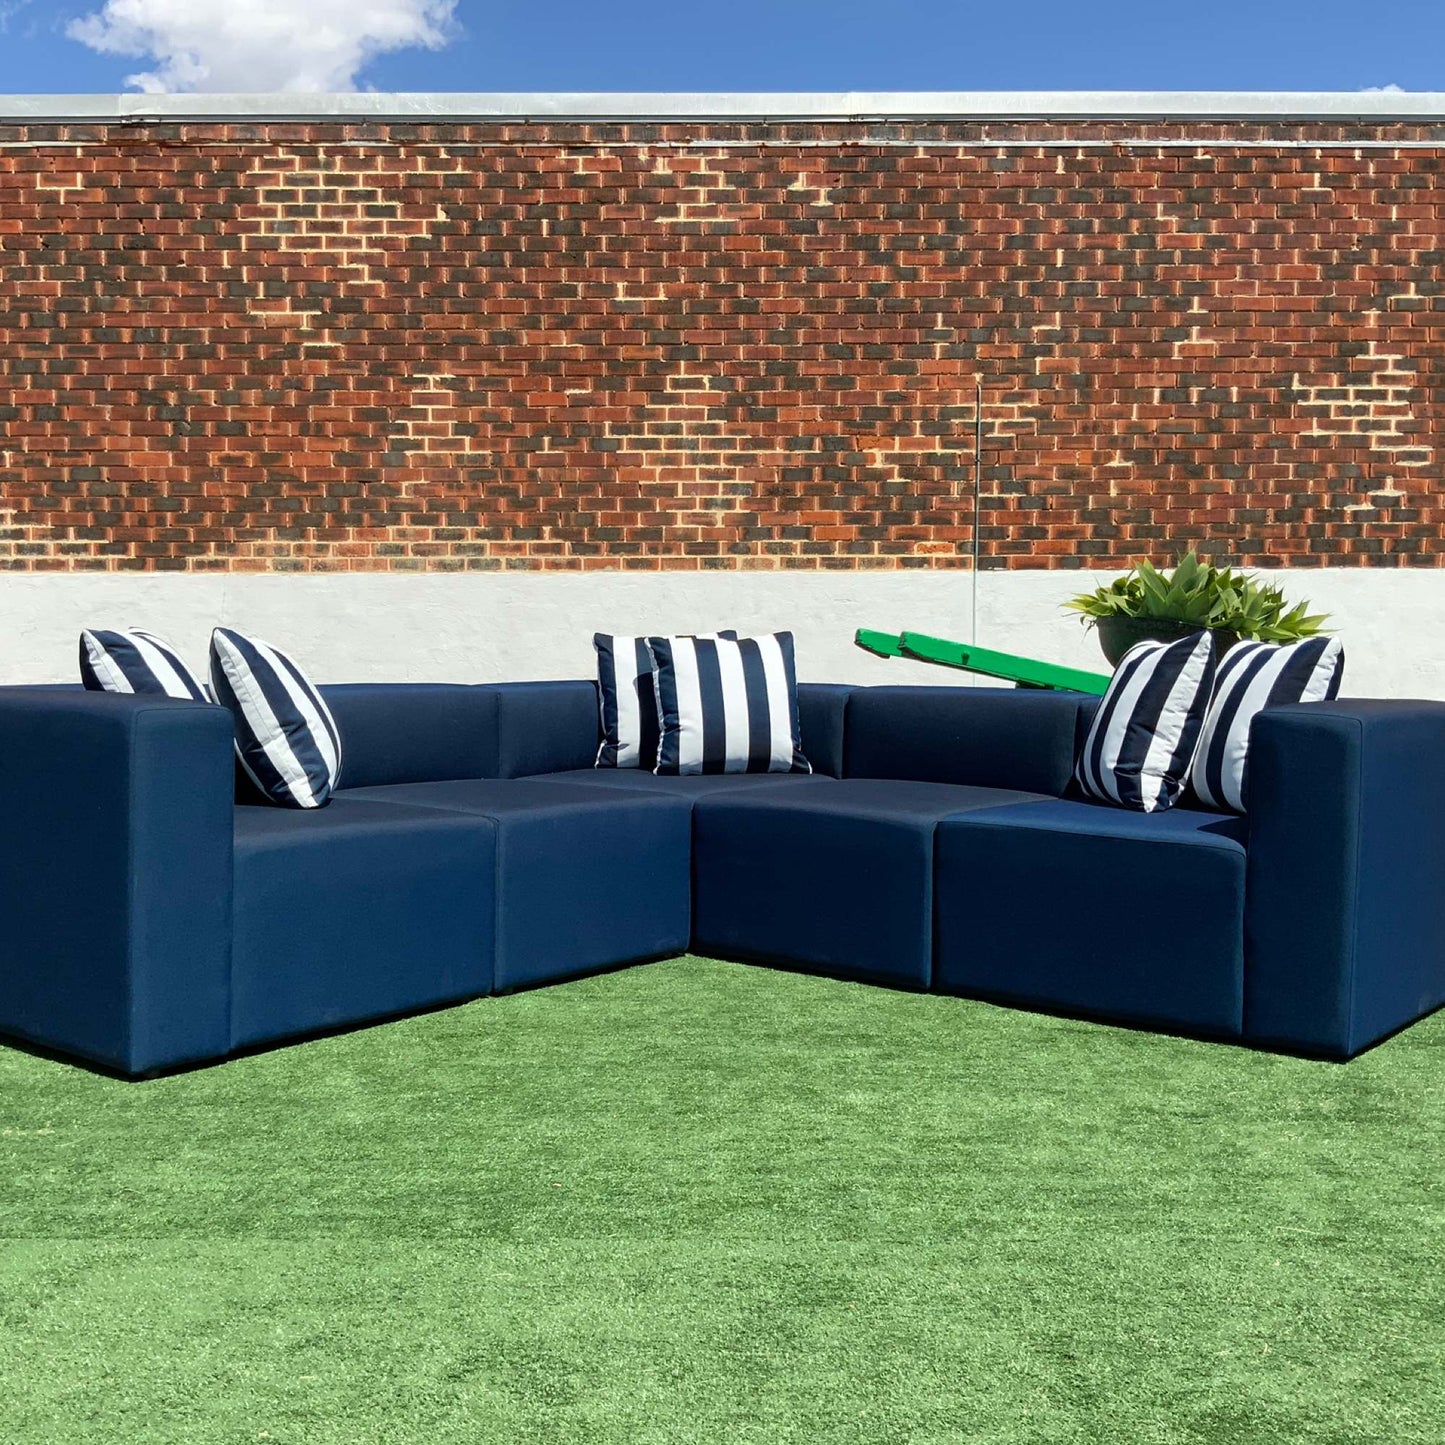 Batavia Outdoor Lounge | Uv Safe All Weather Fabric Multiple Sizes And Options Available Made To